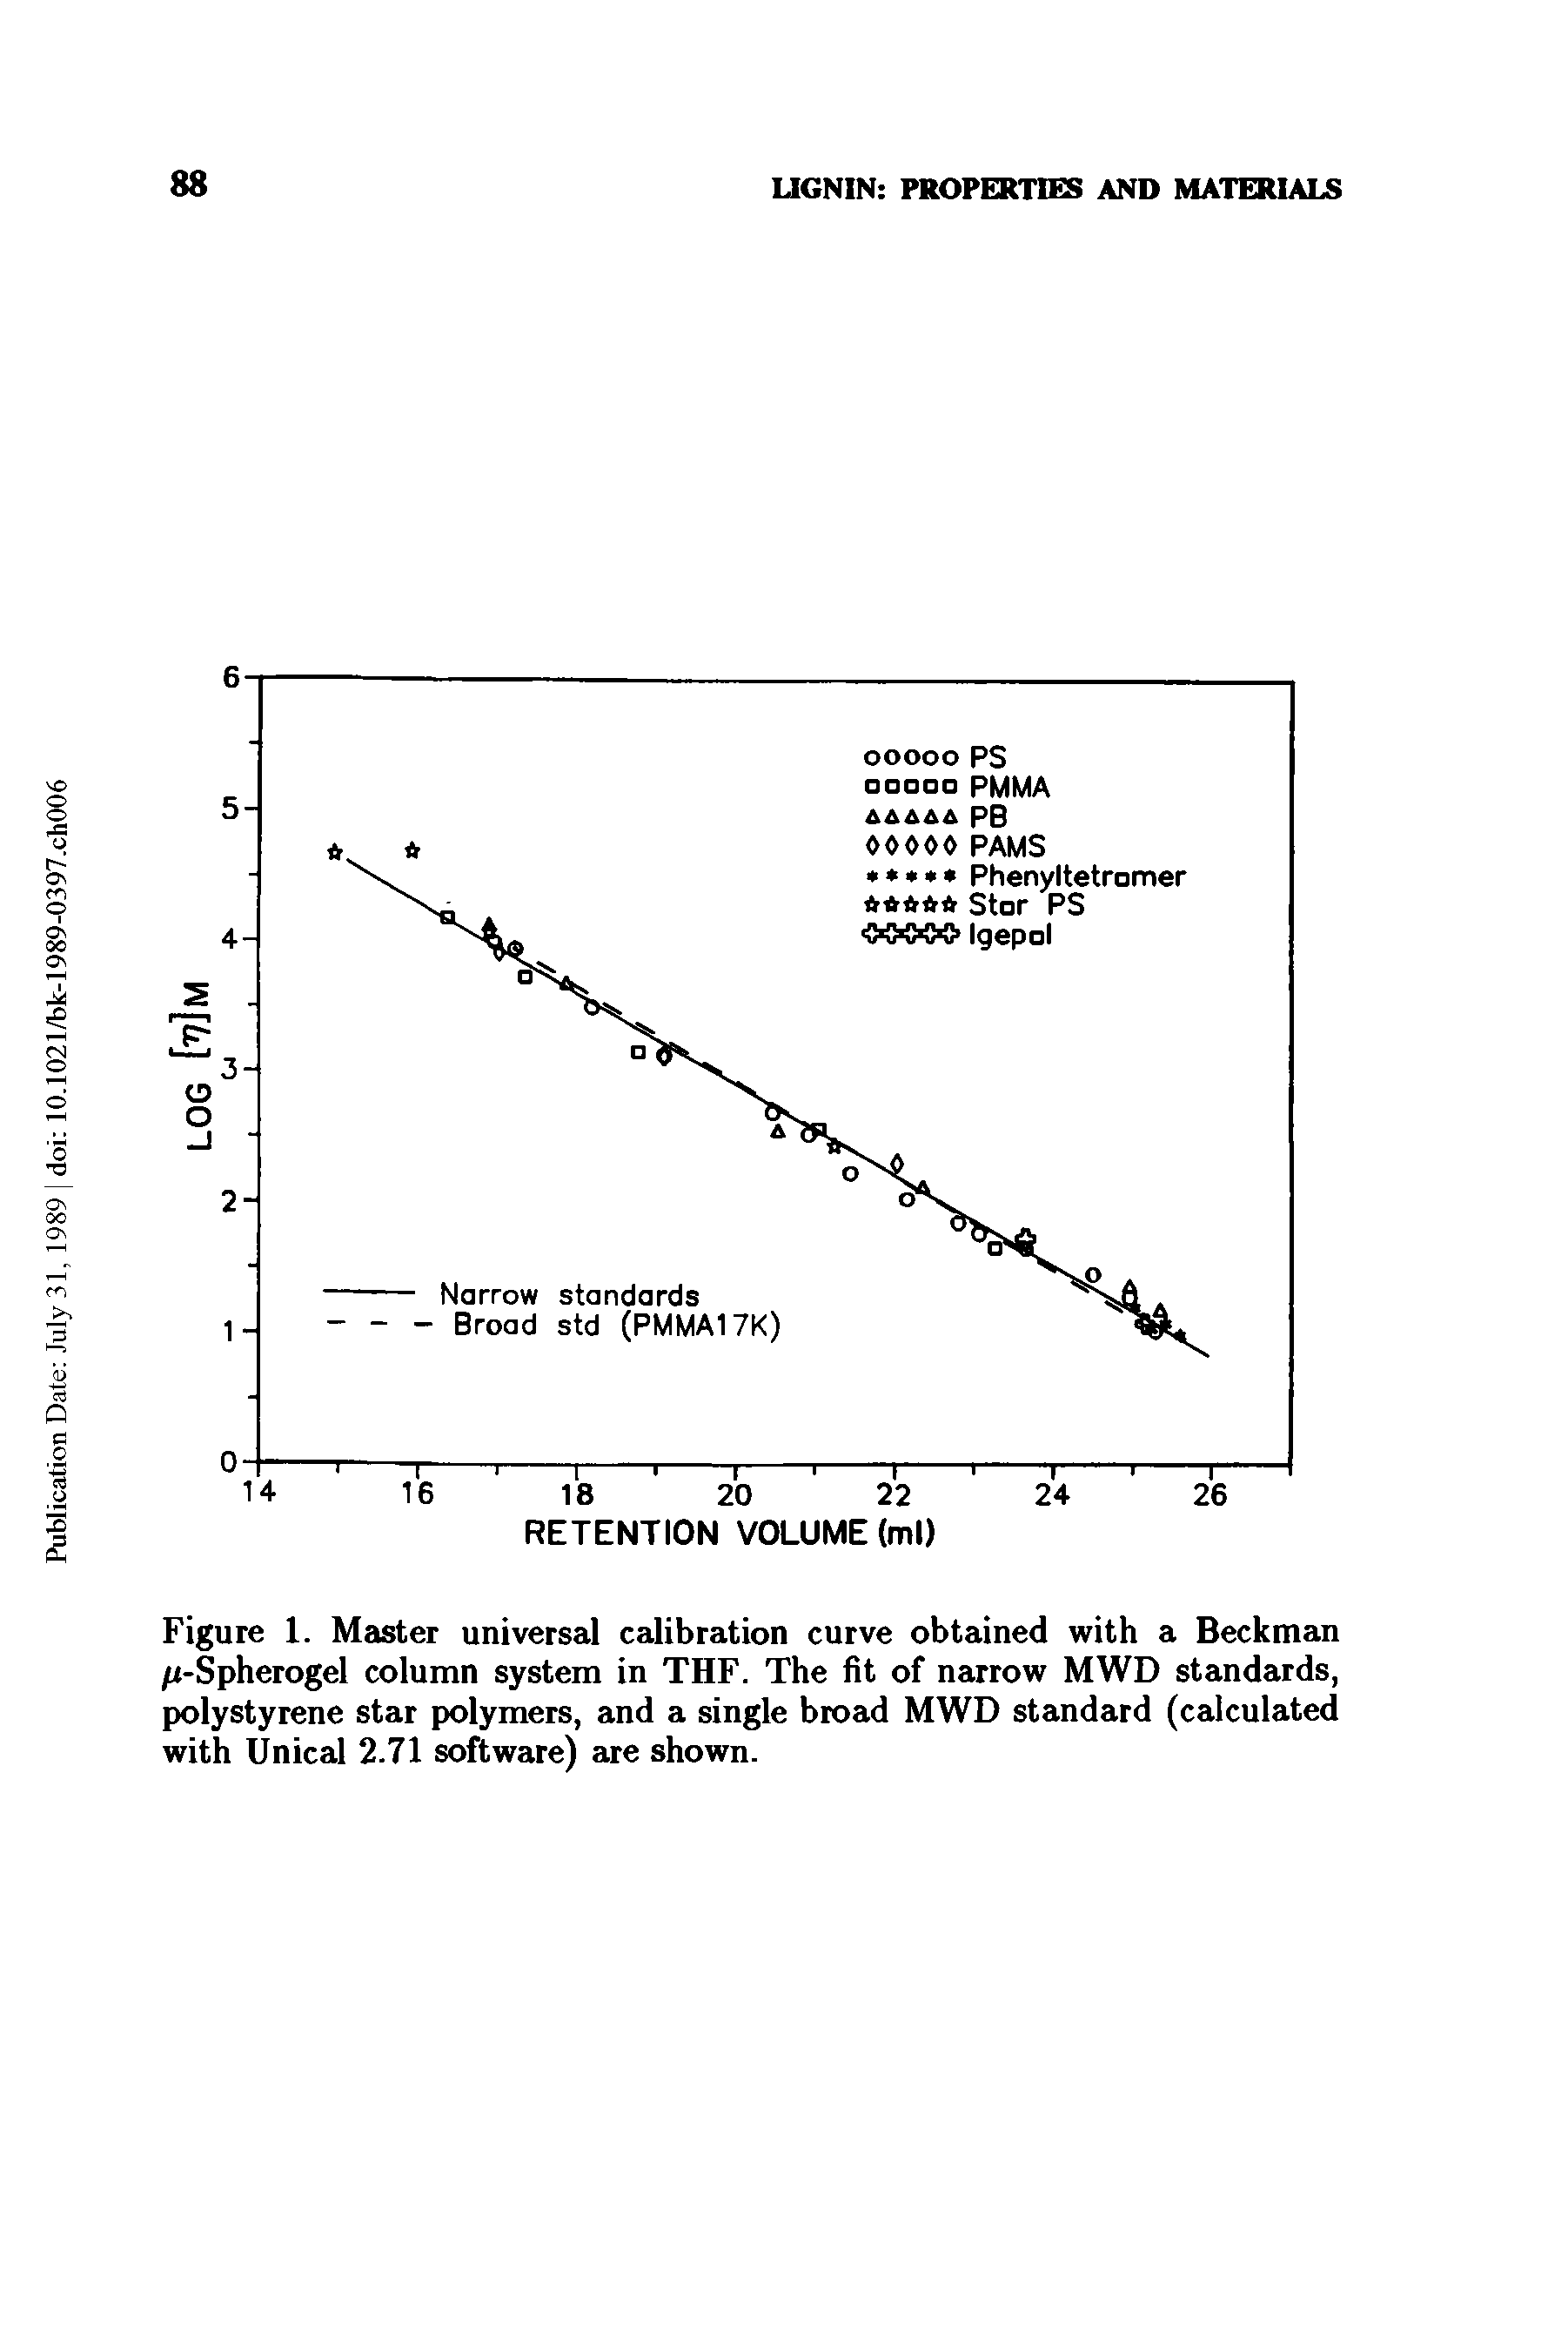 Figure 1. Master universal calibration curve obtained with a Beckman /z-Spherogel column system in THF. The fit of narrow MWD standards, polystyrene star polymers, and a single broad MWD standard (calculated with Unical 2.71 software) are shown.